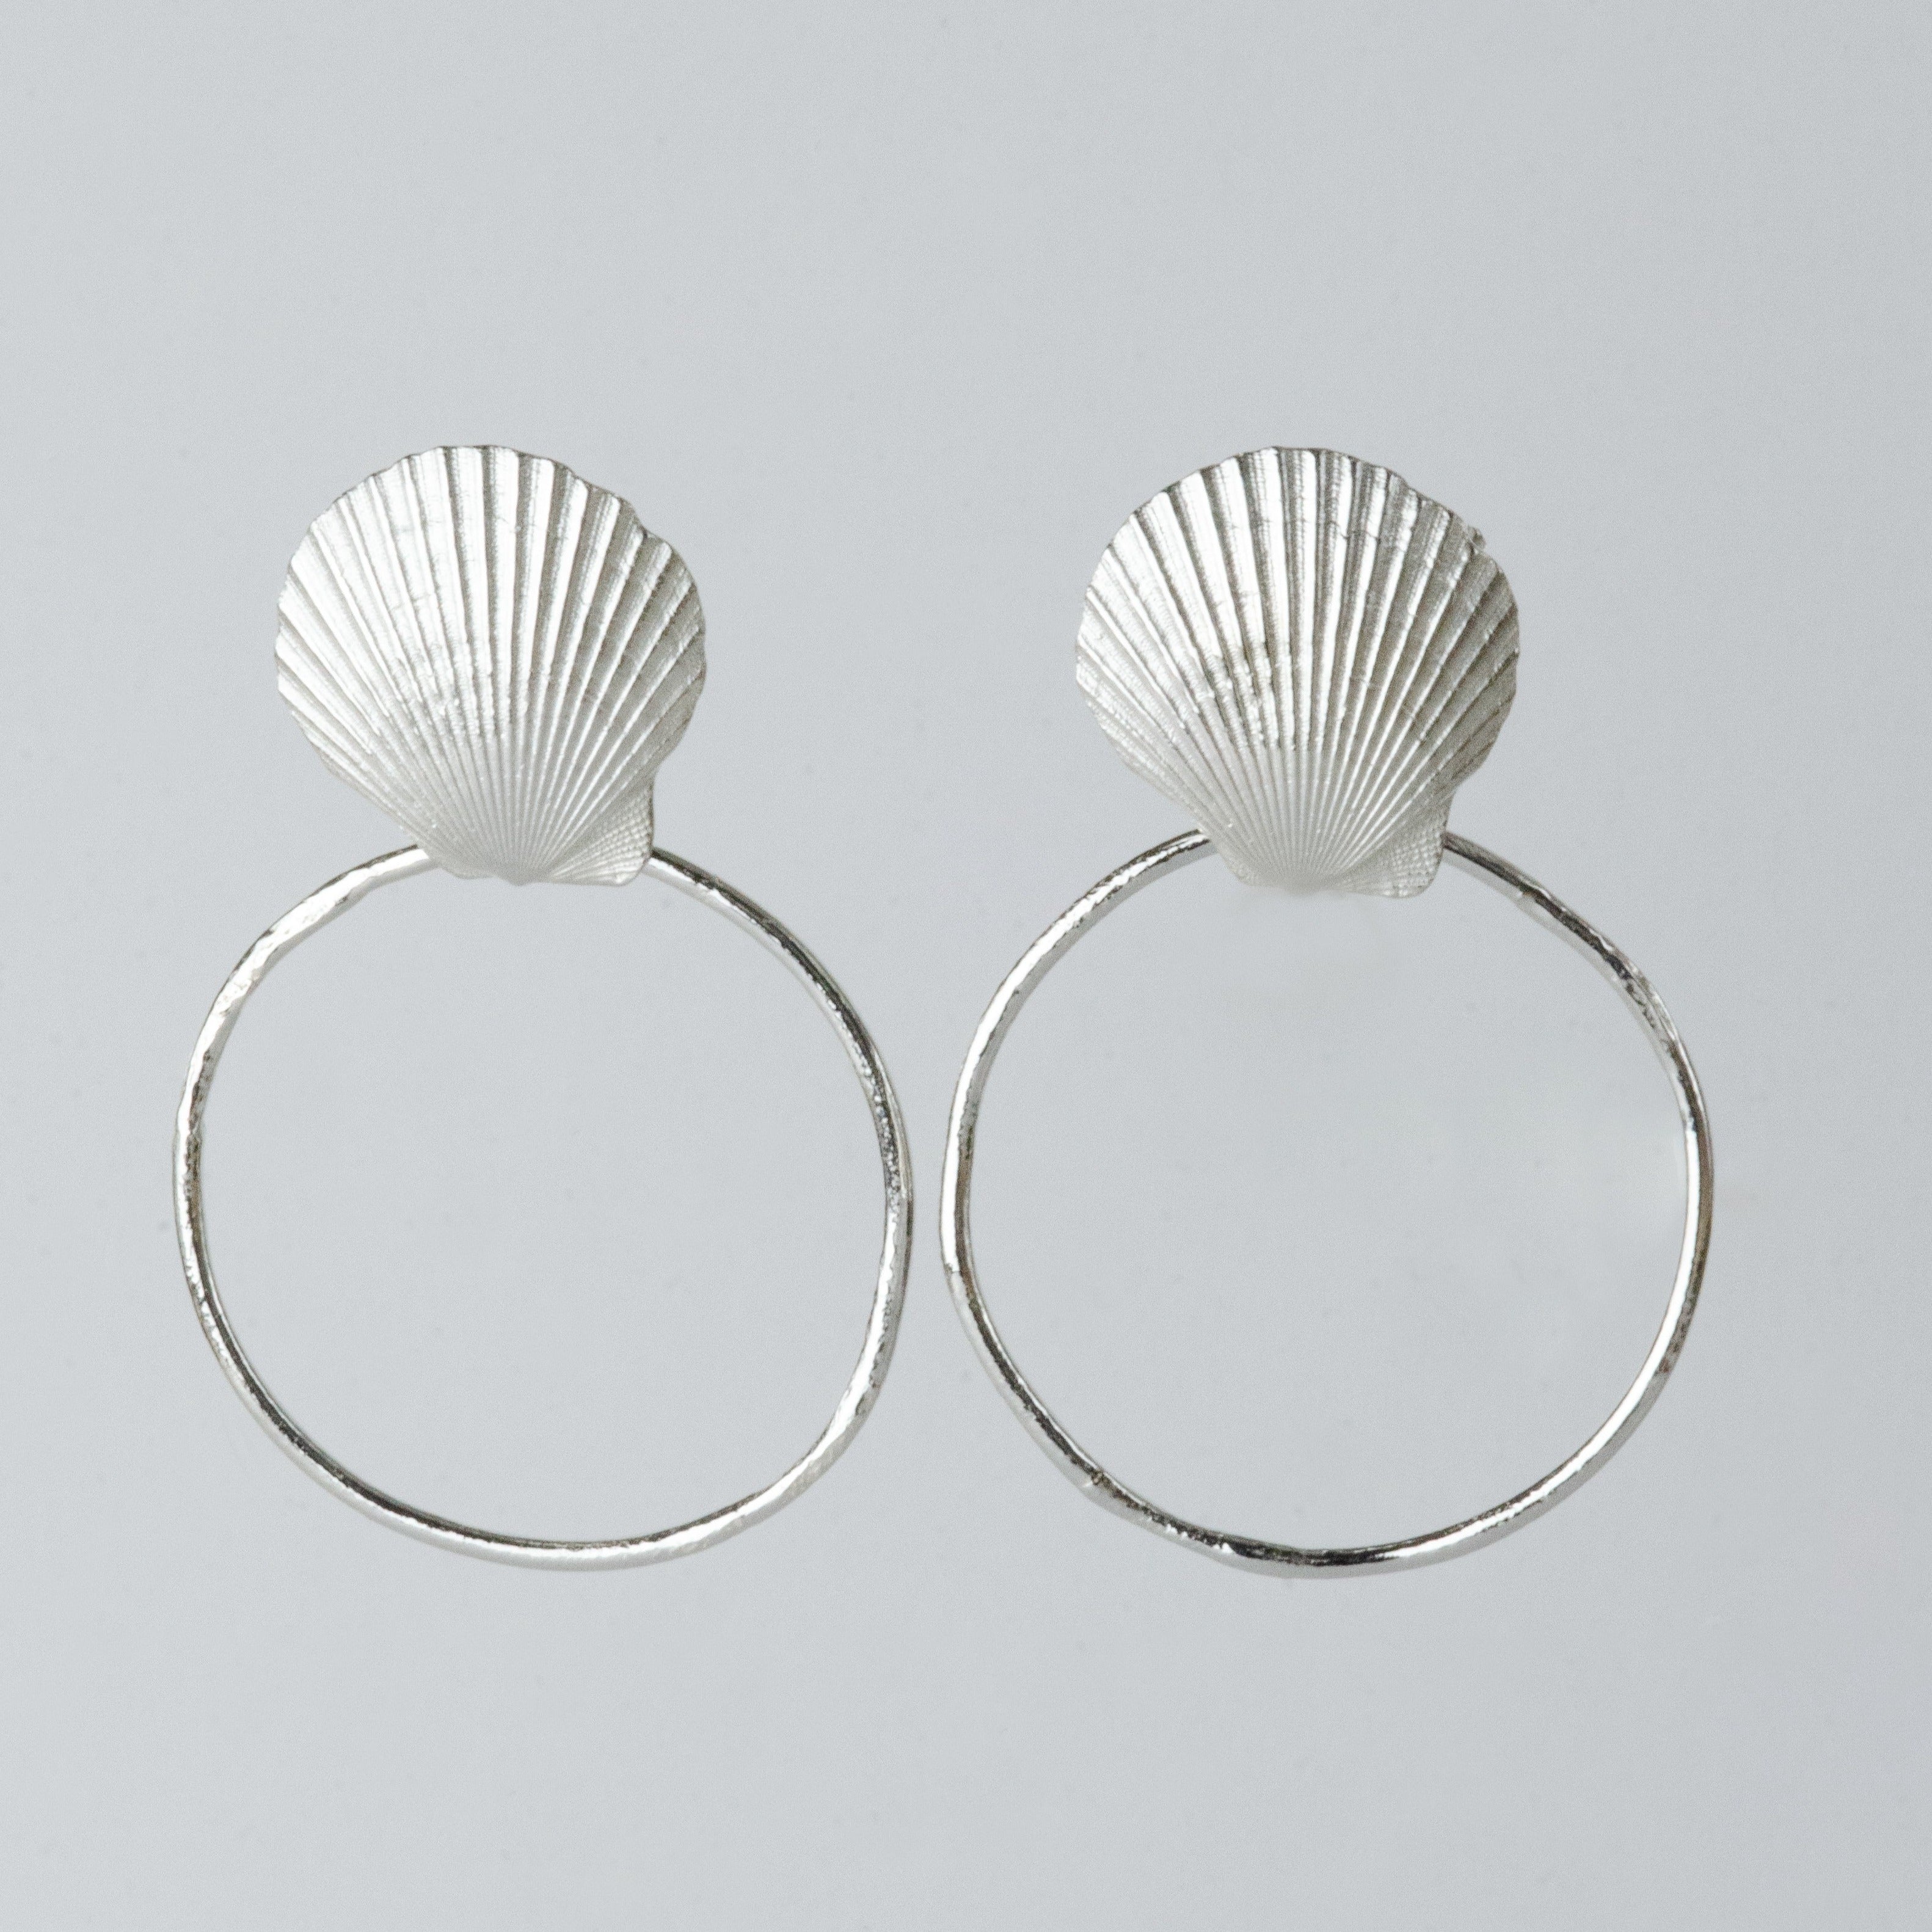 The Shell studs and hoops are versatile and perfect for any occasion. Created using the ancient form of lost wax casting, these earrings are an exact replica of a shell foraged from Bournemouth beach. Enjoy these oceanic treasures as studs, or easily attach the organically textured hoops for more of a statement.